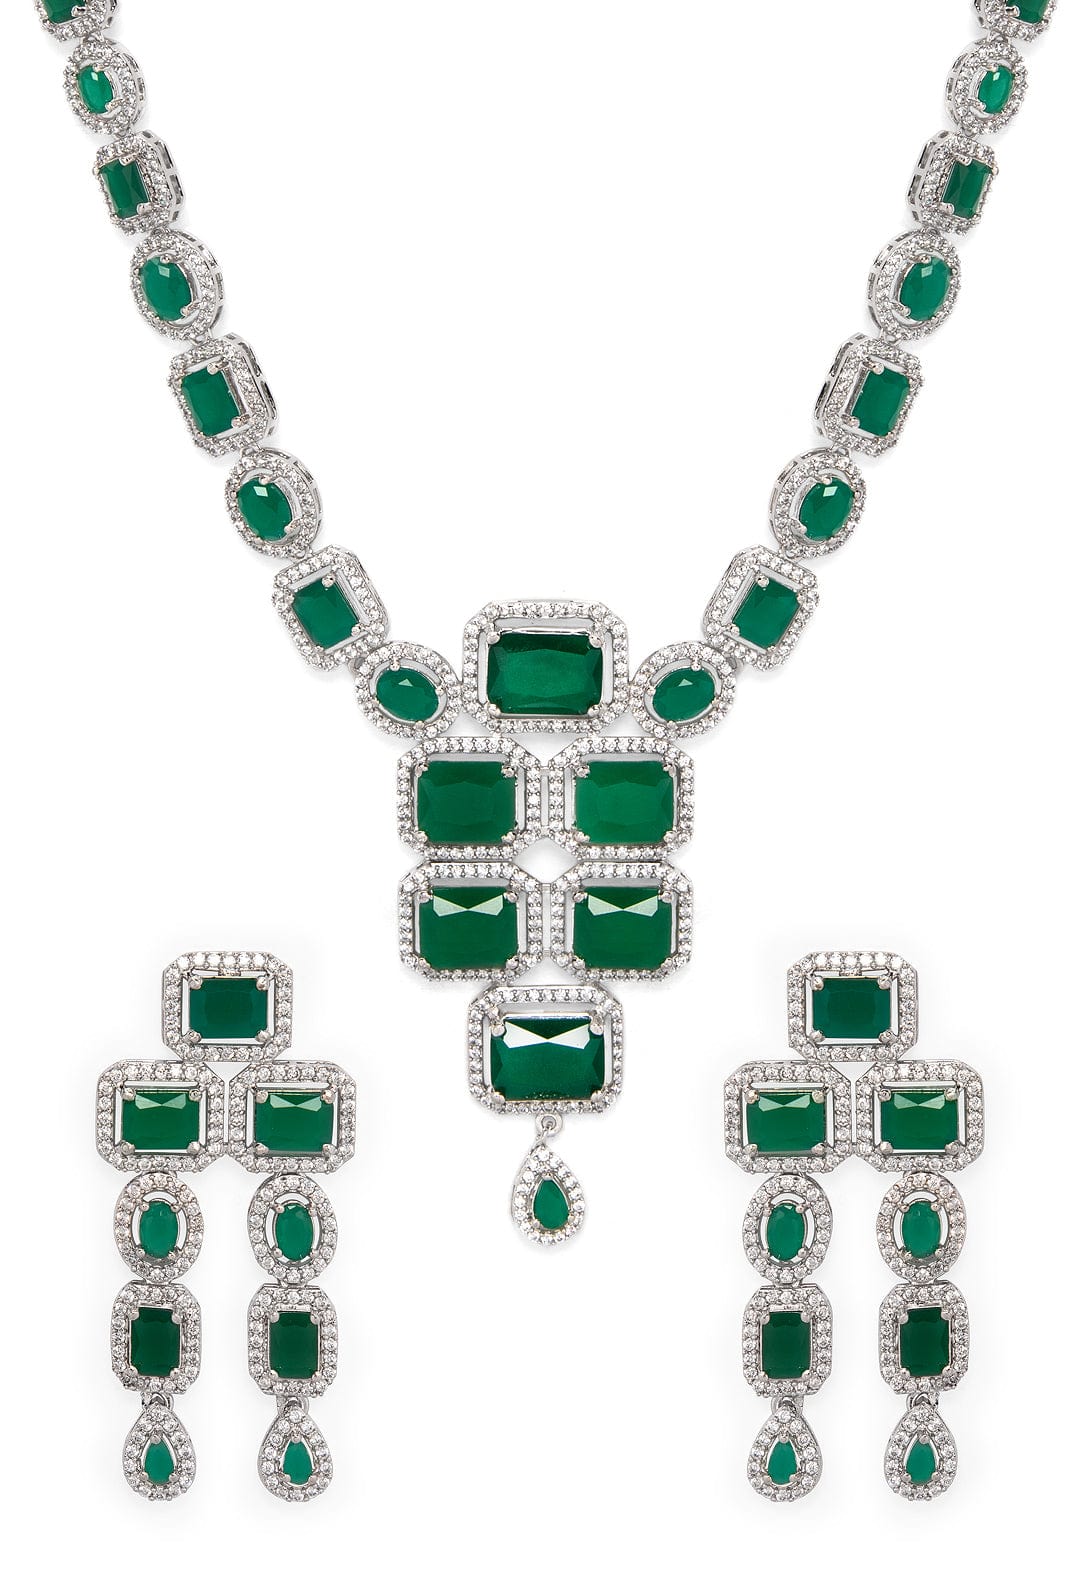 Pooja Sawant in Rubans LUXURY Silver-Plated Green Stone Studded Emerald Handcrafted Statement Necklace Necklace Set